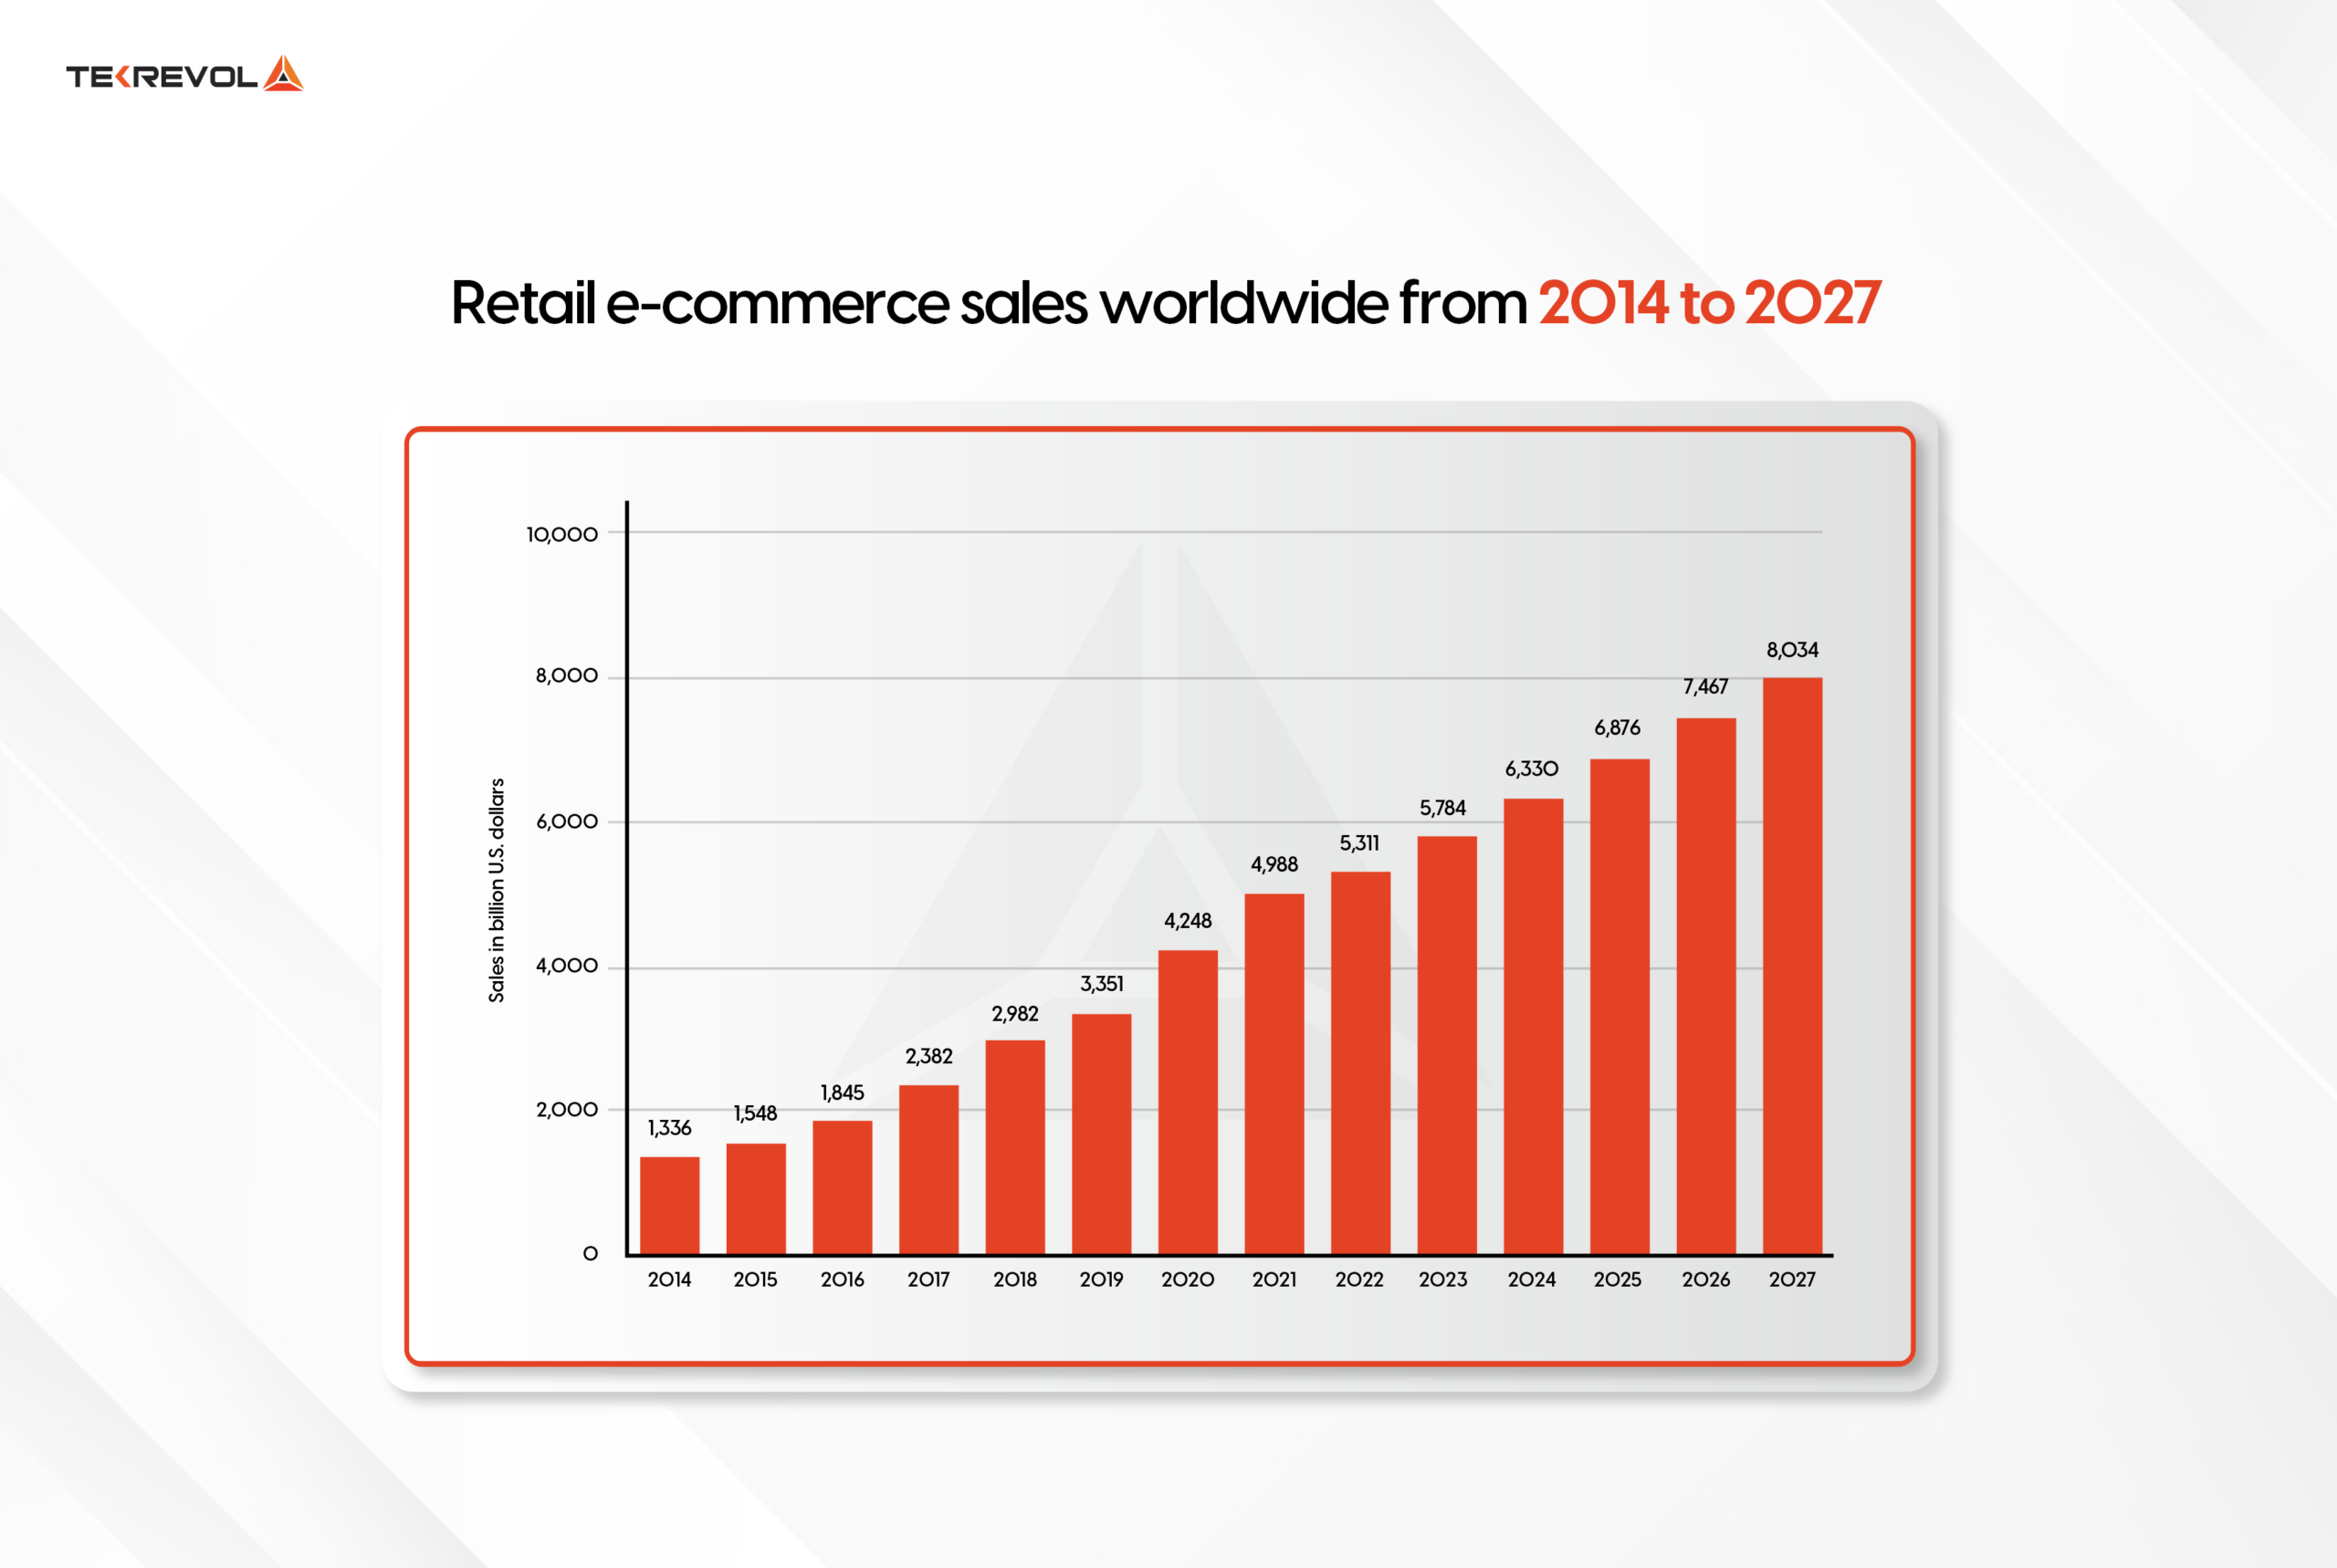 eCommerce is proceeding, reflecting global trends